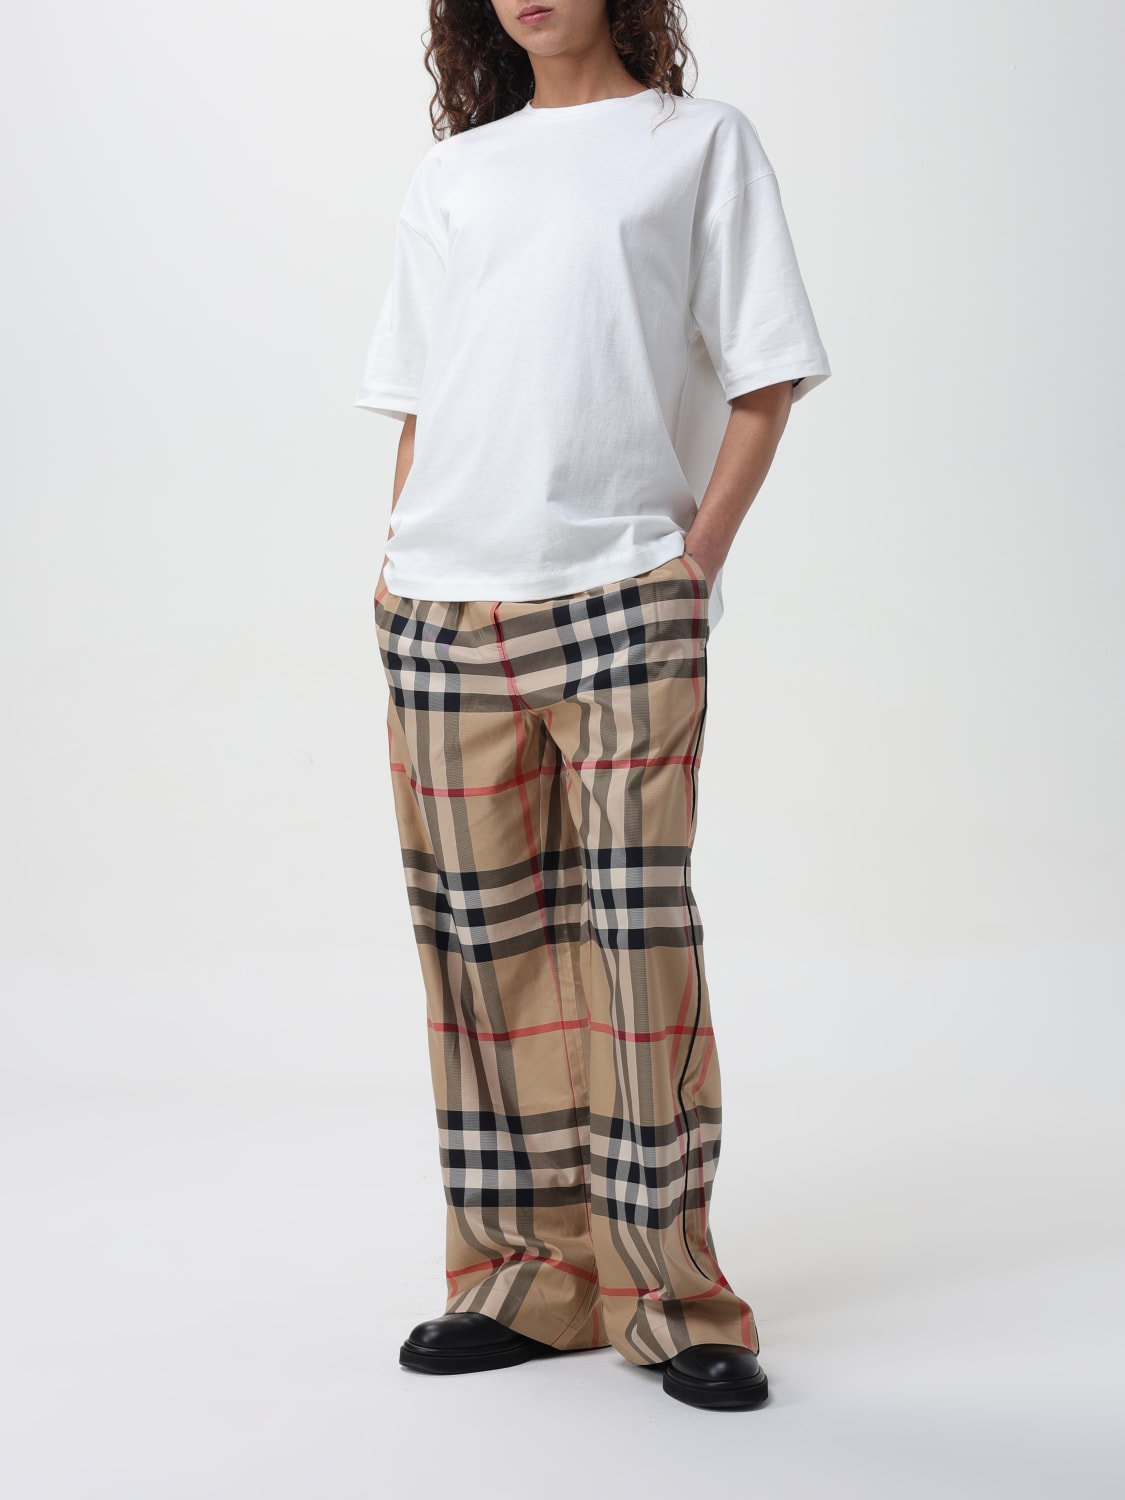 BURBERRY: pants for woman - Beige  Burberry pants 8071101 online at